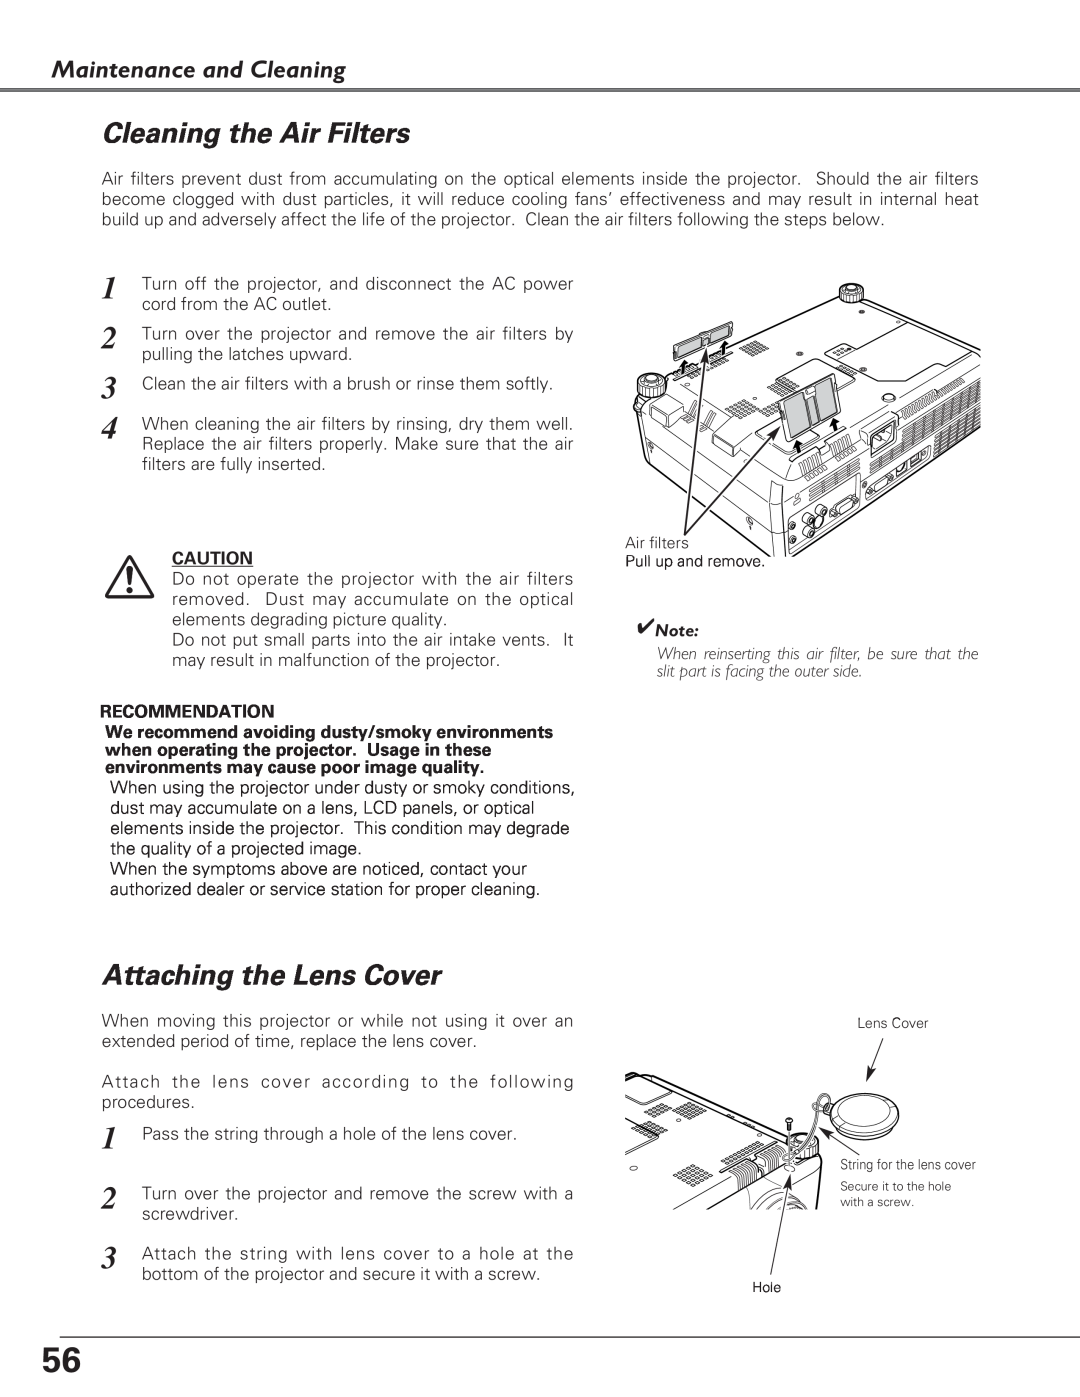 Eiki LC-XB27 owner manual Cleaning the Air Filters, Attaching the Lens Cover, Maintenance and Cleaning, Recommendation 